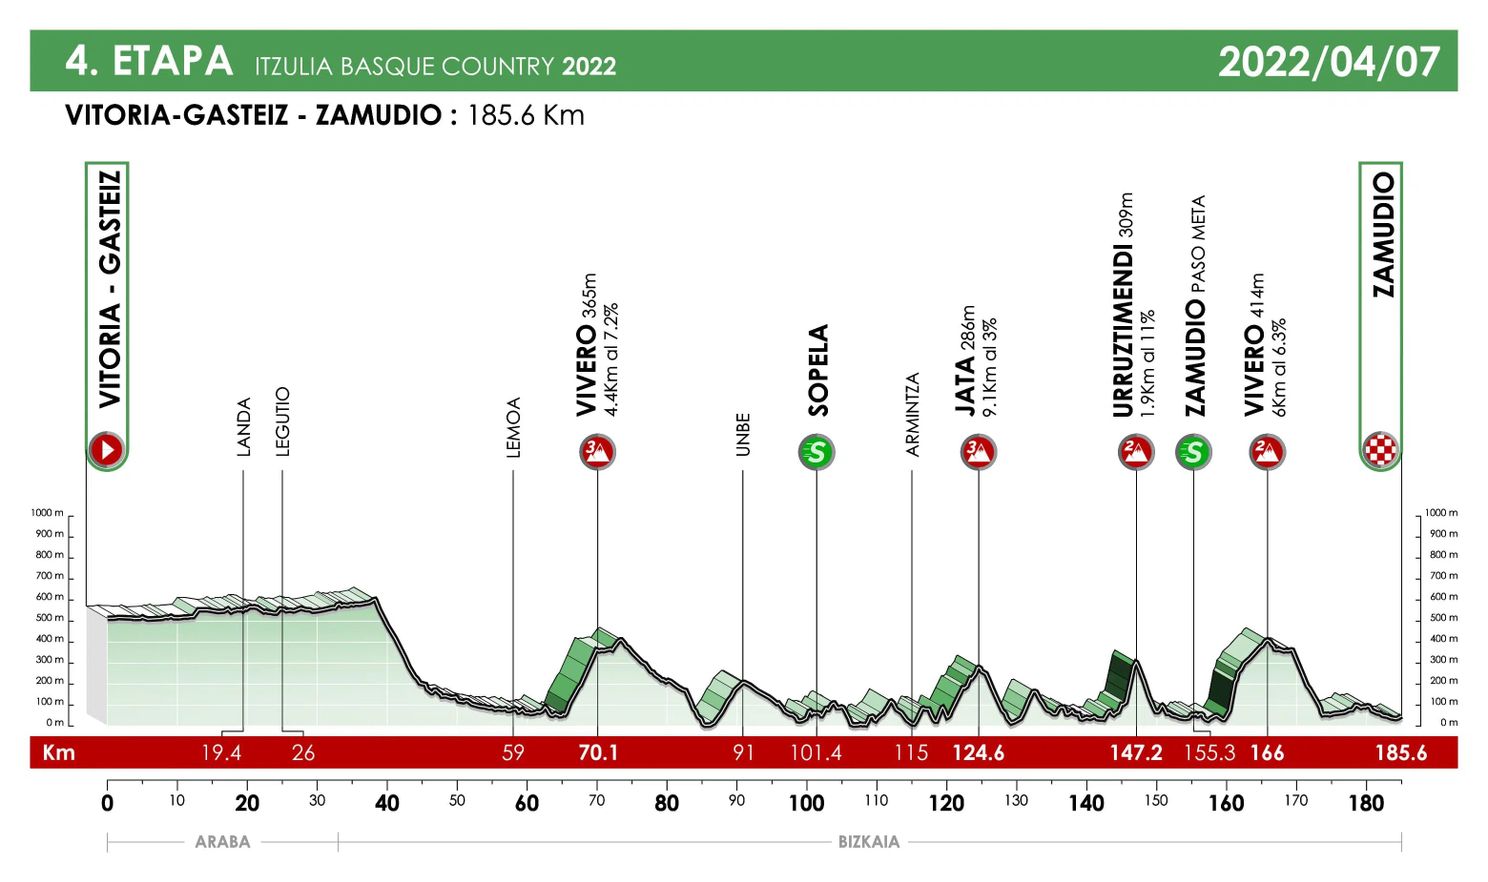 Itzulia Basque Country 2022 route revealed